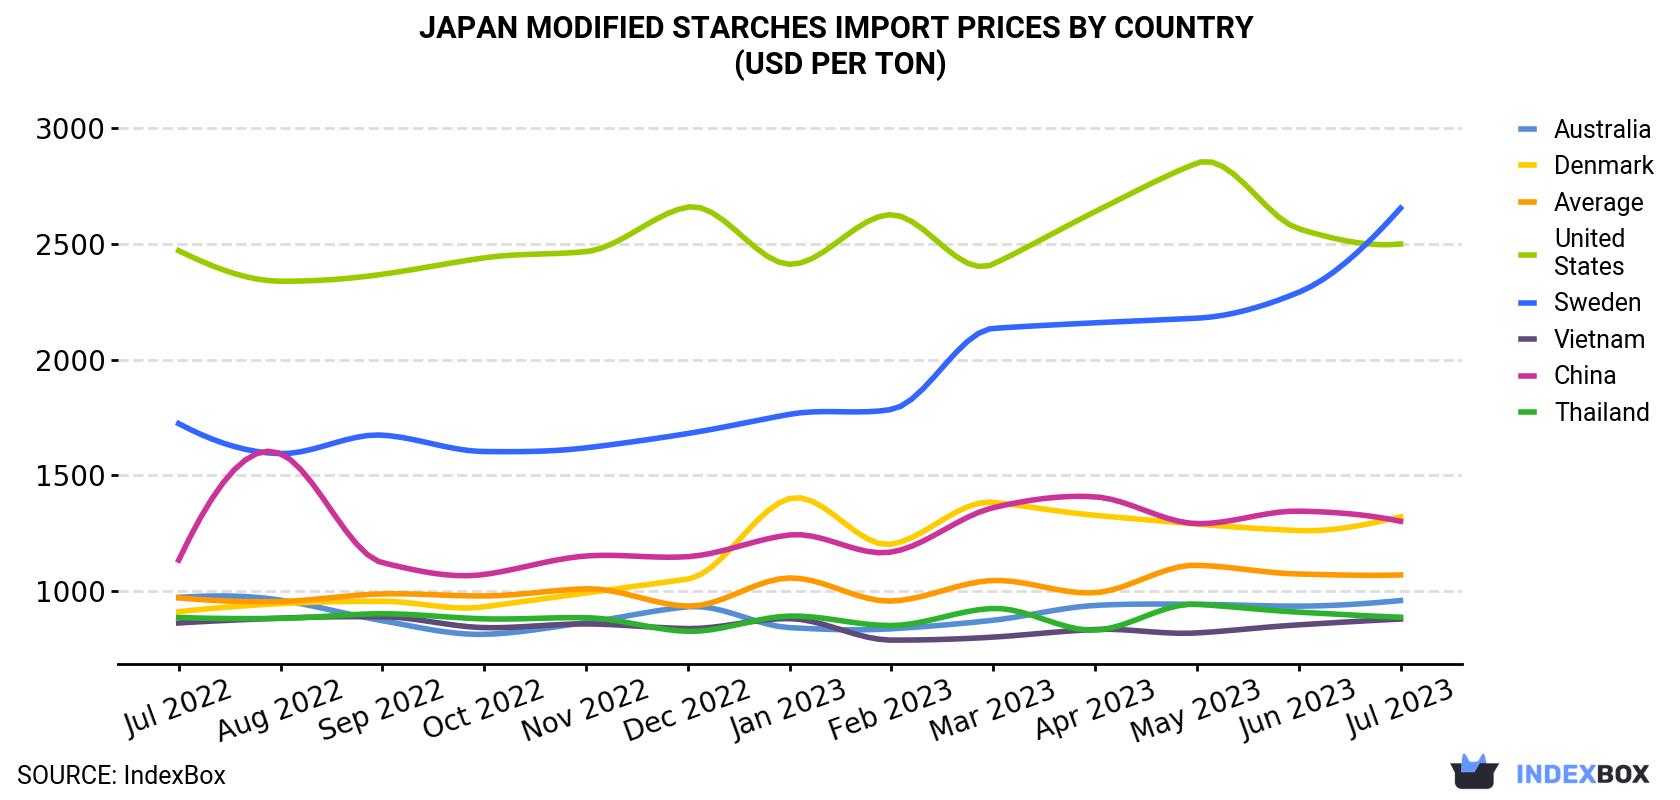 Japan Modified Starches Import Prices By Country (USD Per Ton)